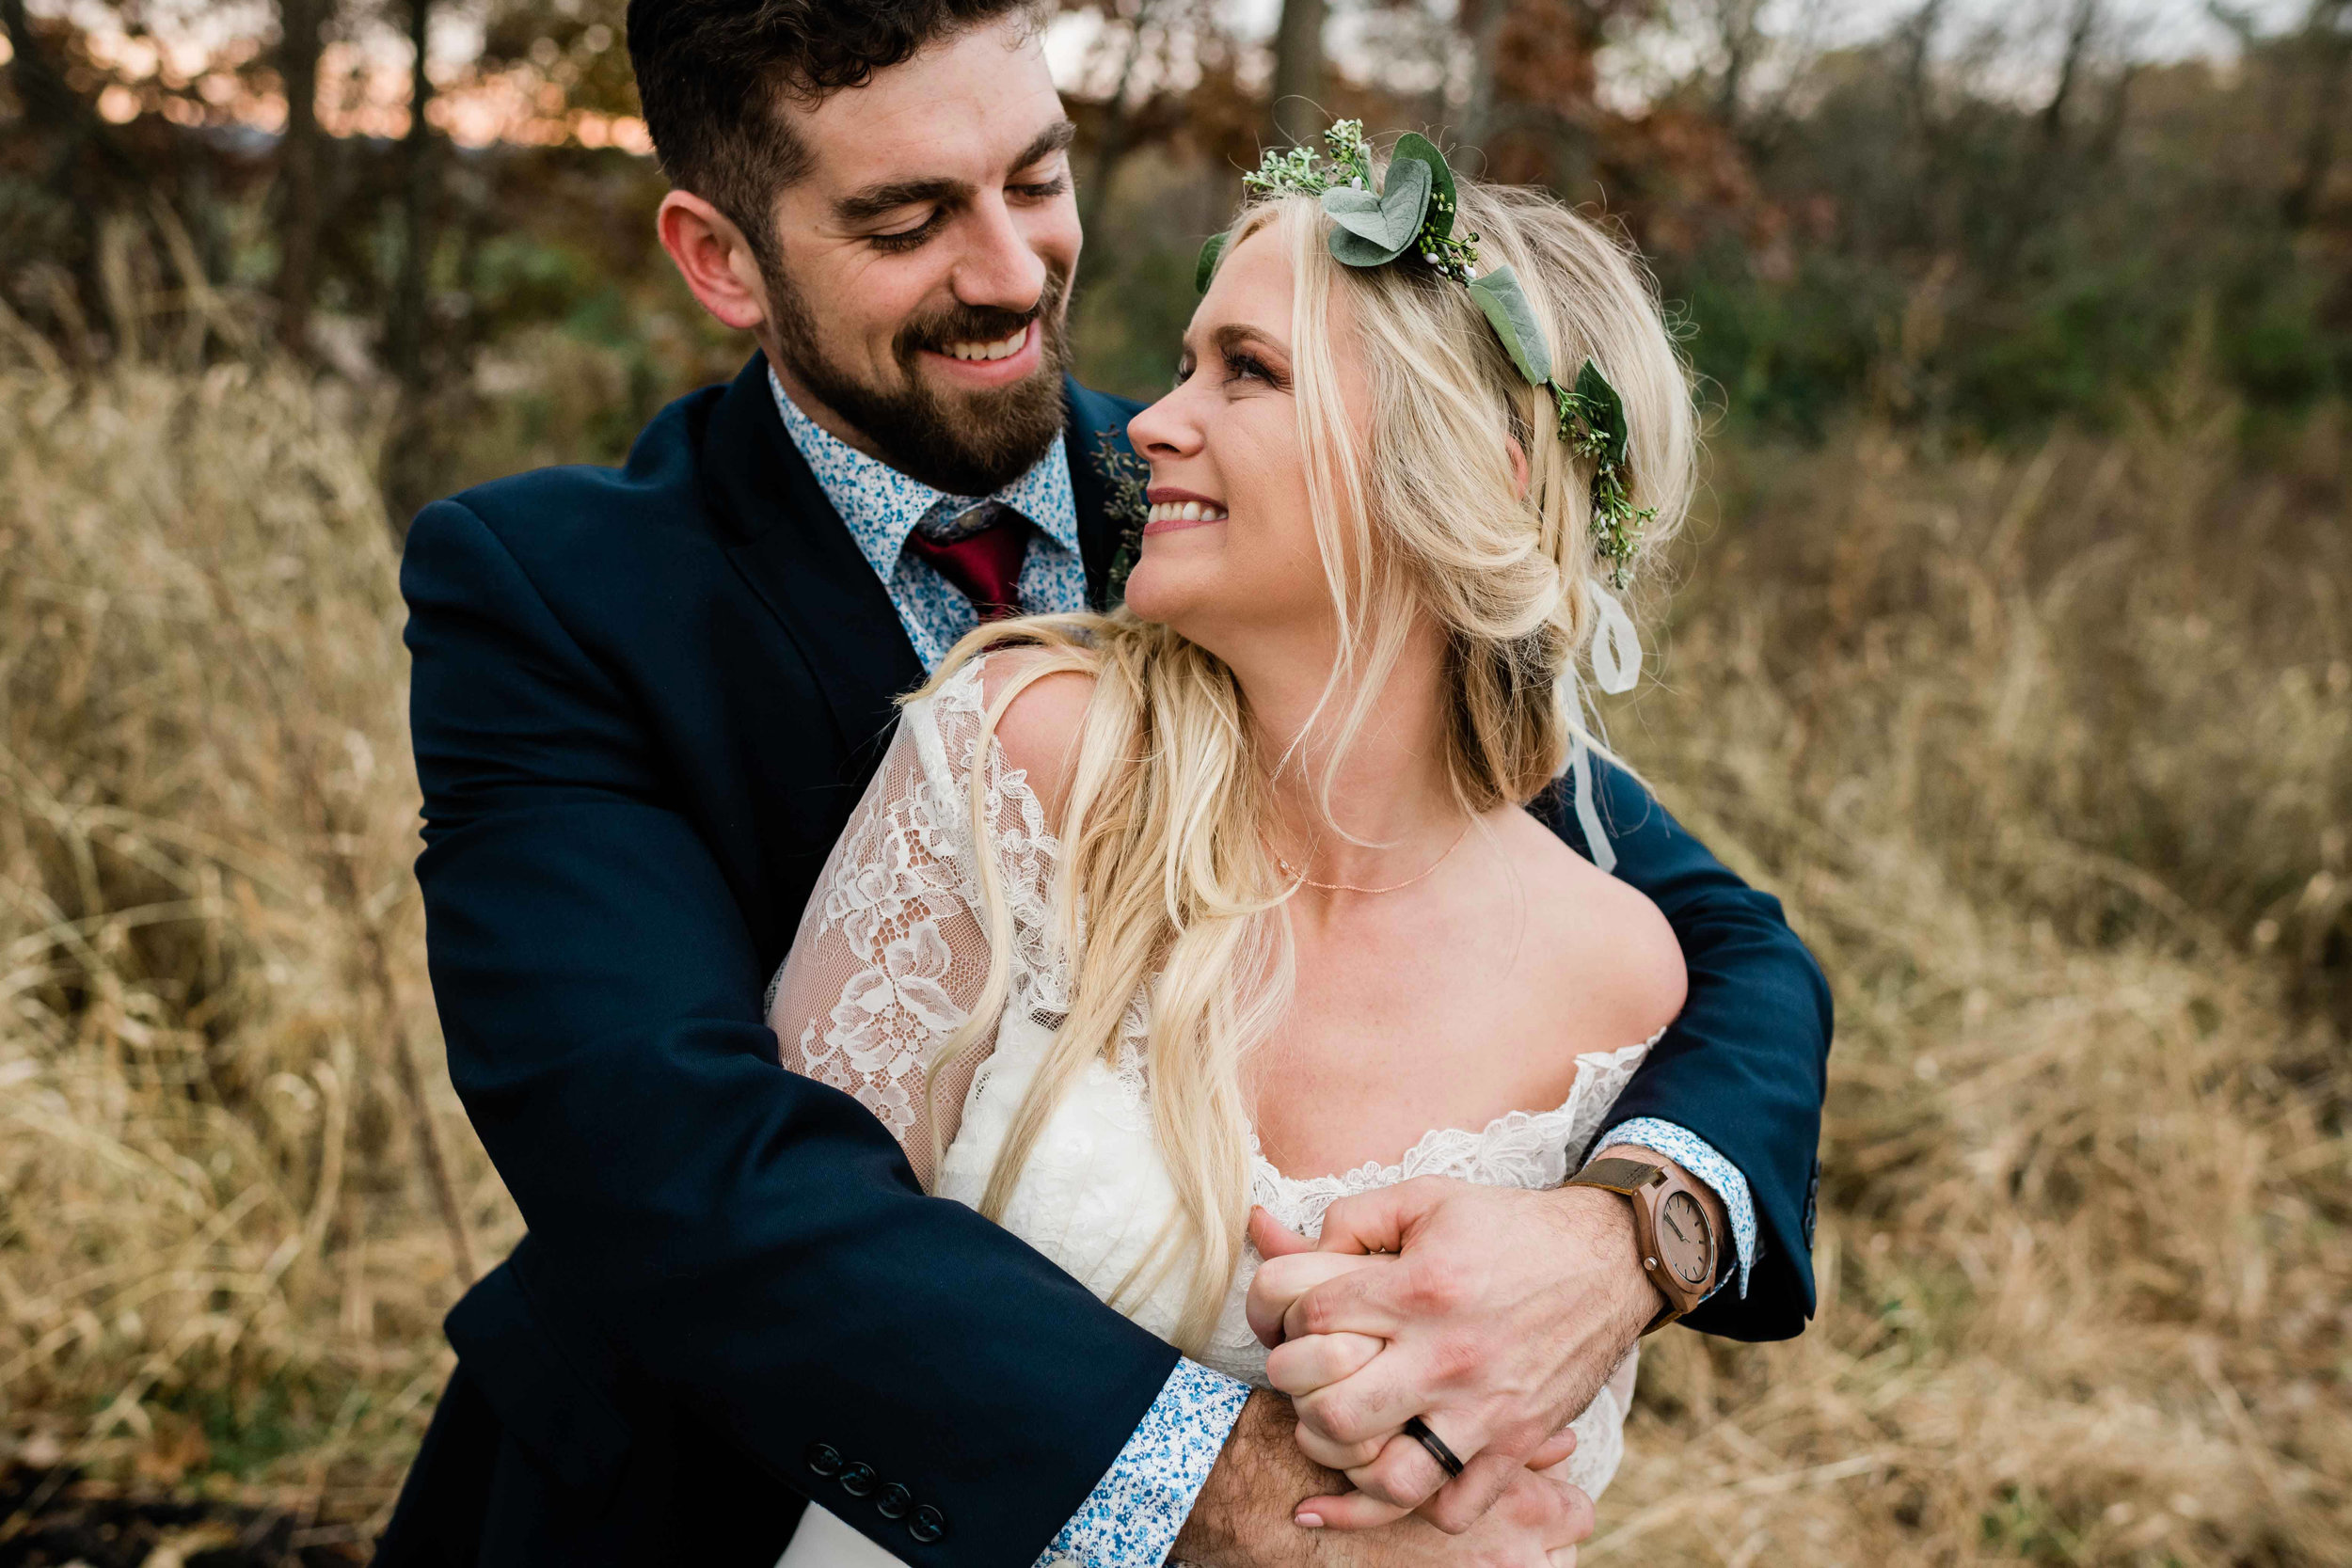 Groom wraps his arm around bride from behind